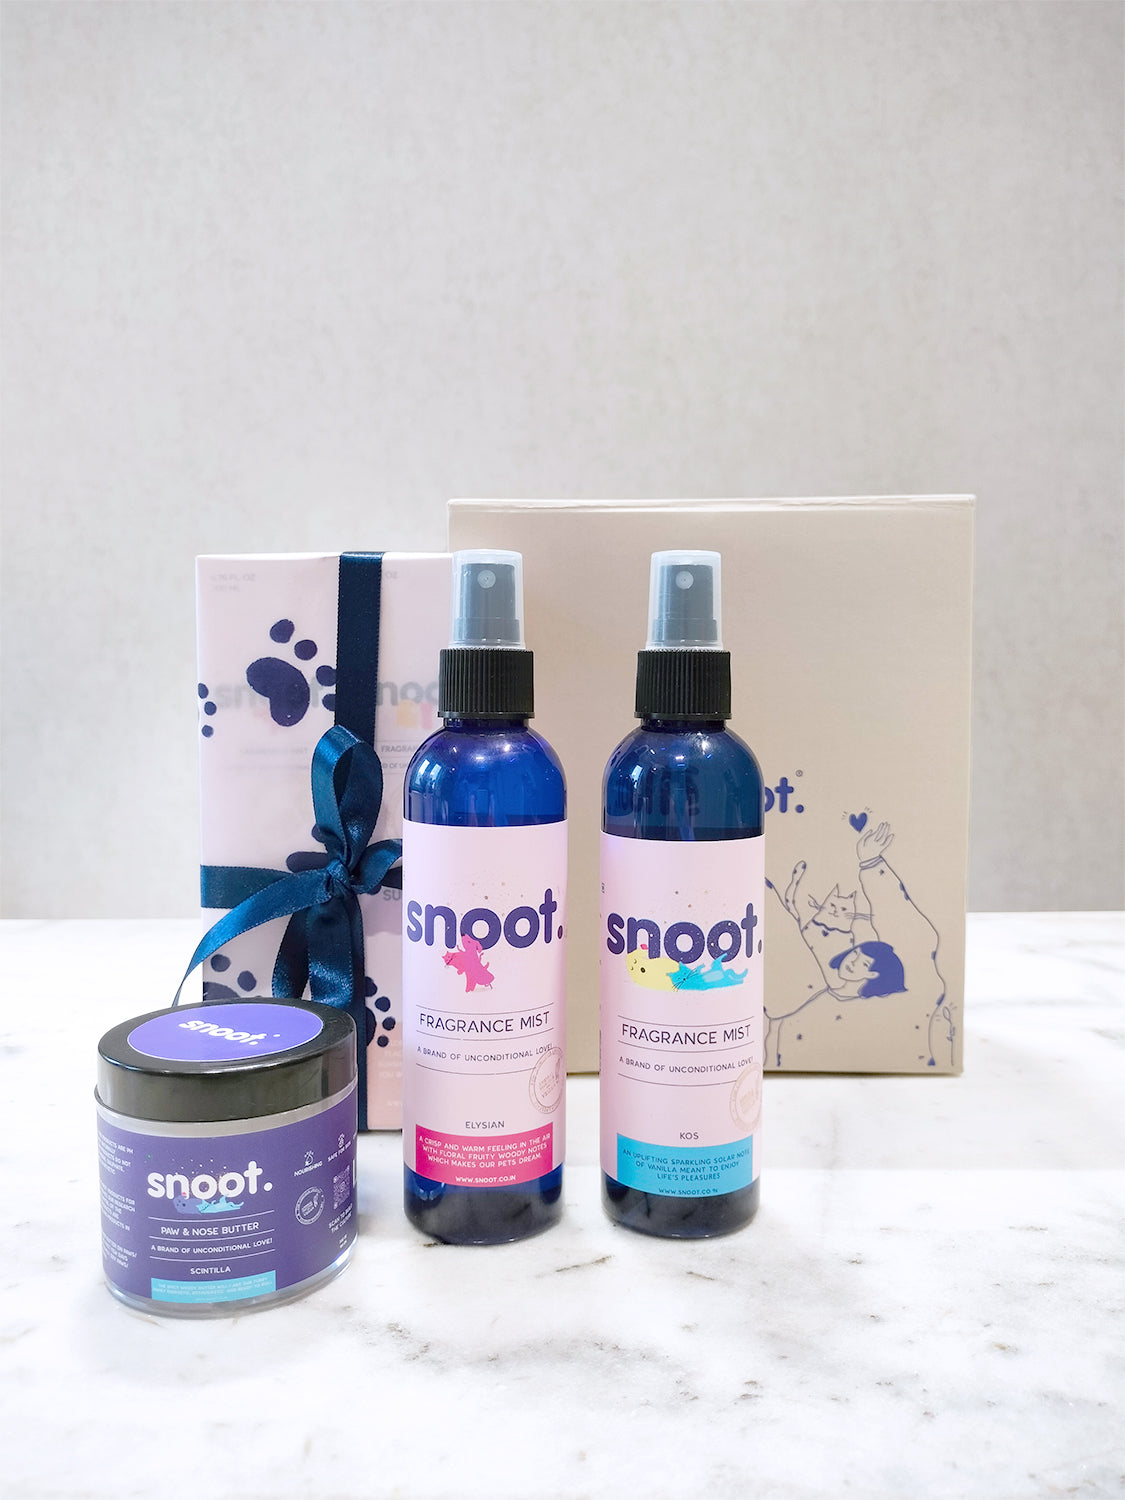 Gift set for pets, dogs, and cats, featuring two Fragrance mists and a Paw and Nose Butter